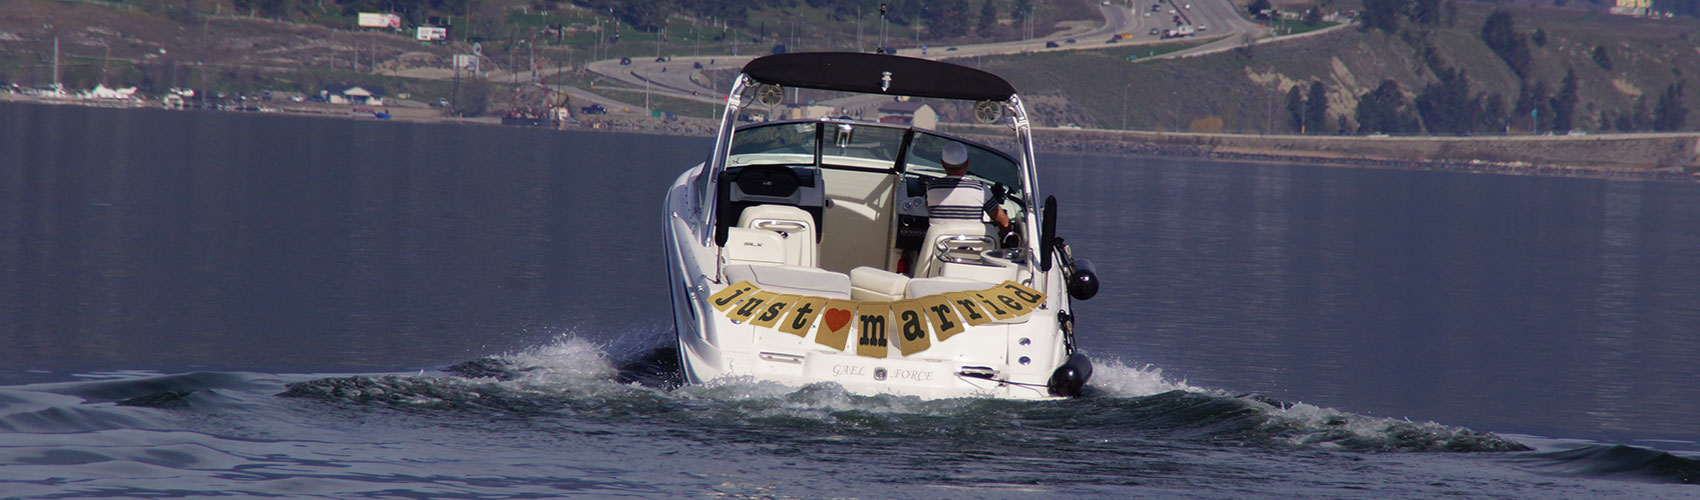 Kelowna Water Taxi & Cruises offers a great way to celebrate your wedding!